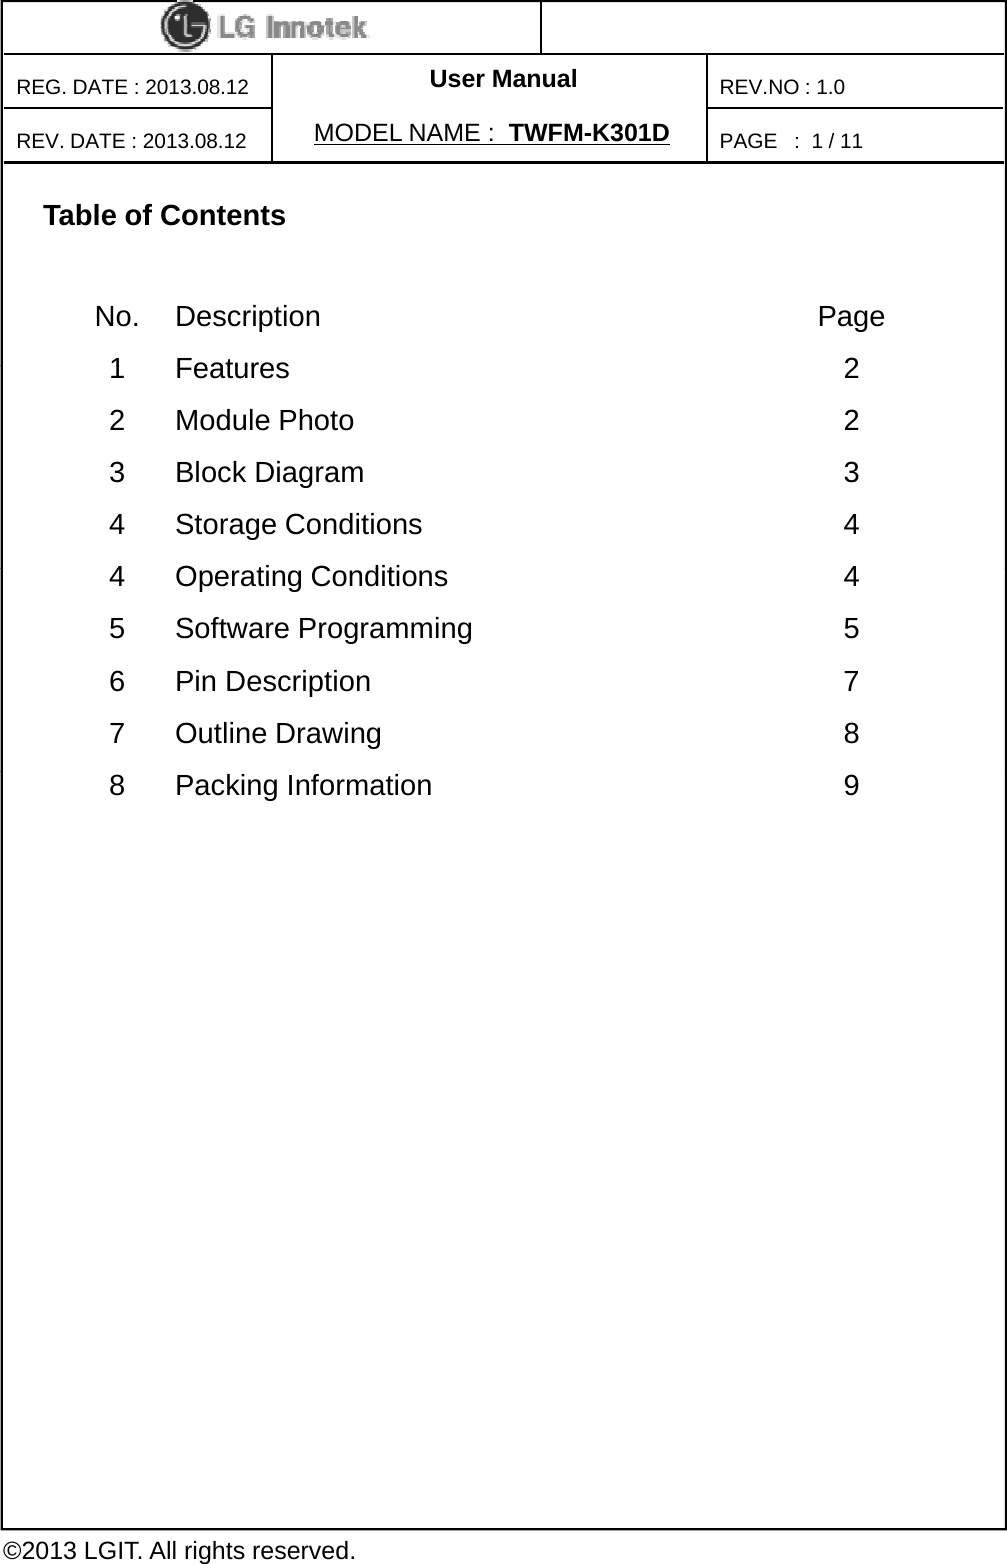 User ManualPAGE   :REG. DATE : 2013.08.12MODEL NAME : TWFM-K301DREV. DATE : 2013.08.12REV.NO : 1.01/ 11Table of ContentsNo. Description Page1Features21Features22 Module Photo 23 Block Diagram 34 Storage Conditions 44OtiCditi44Operating Conditions45 Software Programming 56 Pin Description 77 Outline Drawing 88 Packing Information 9©2013 LGIT. All rights reserved.